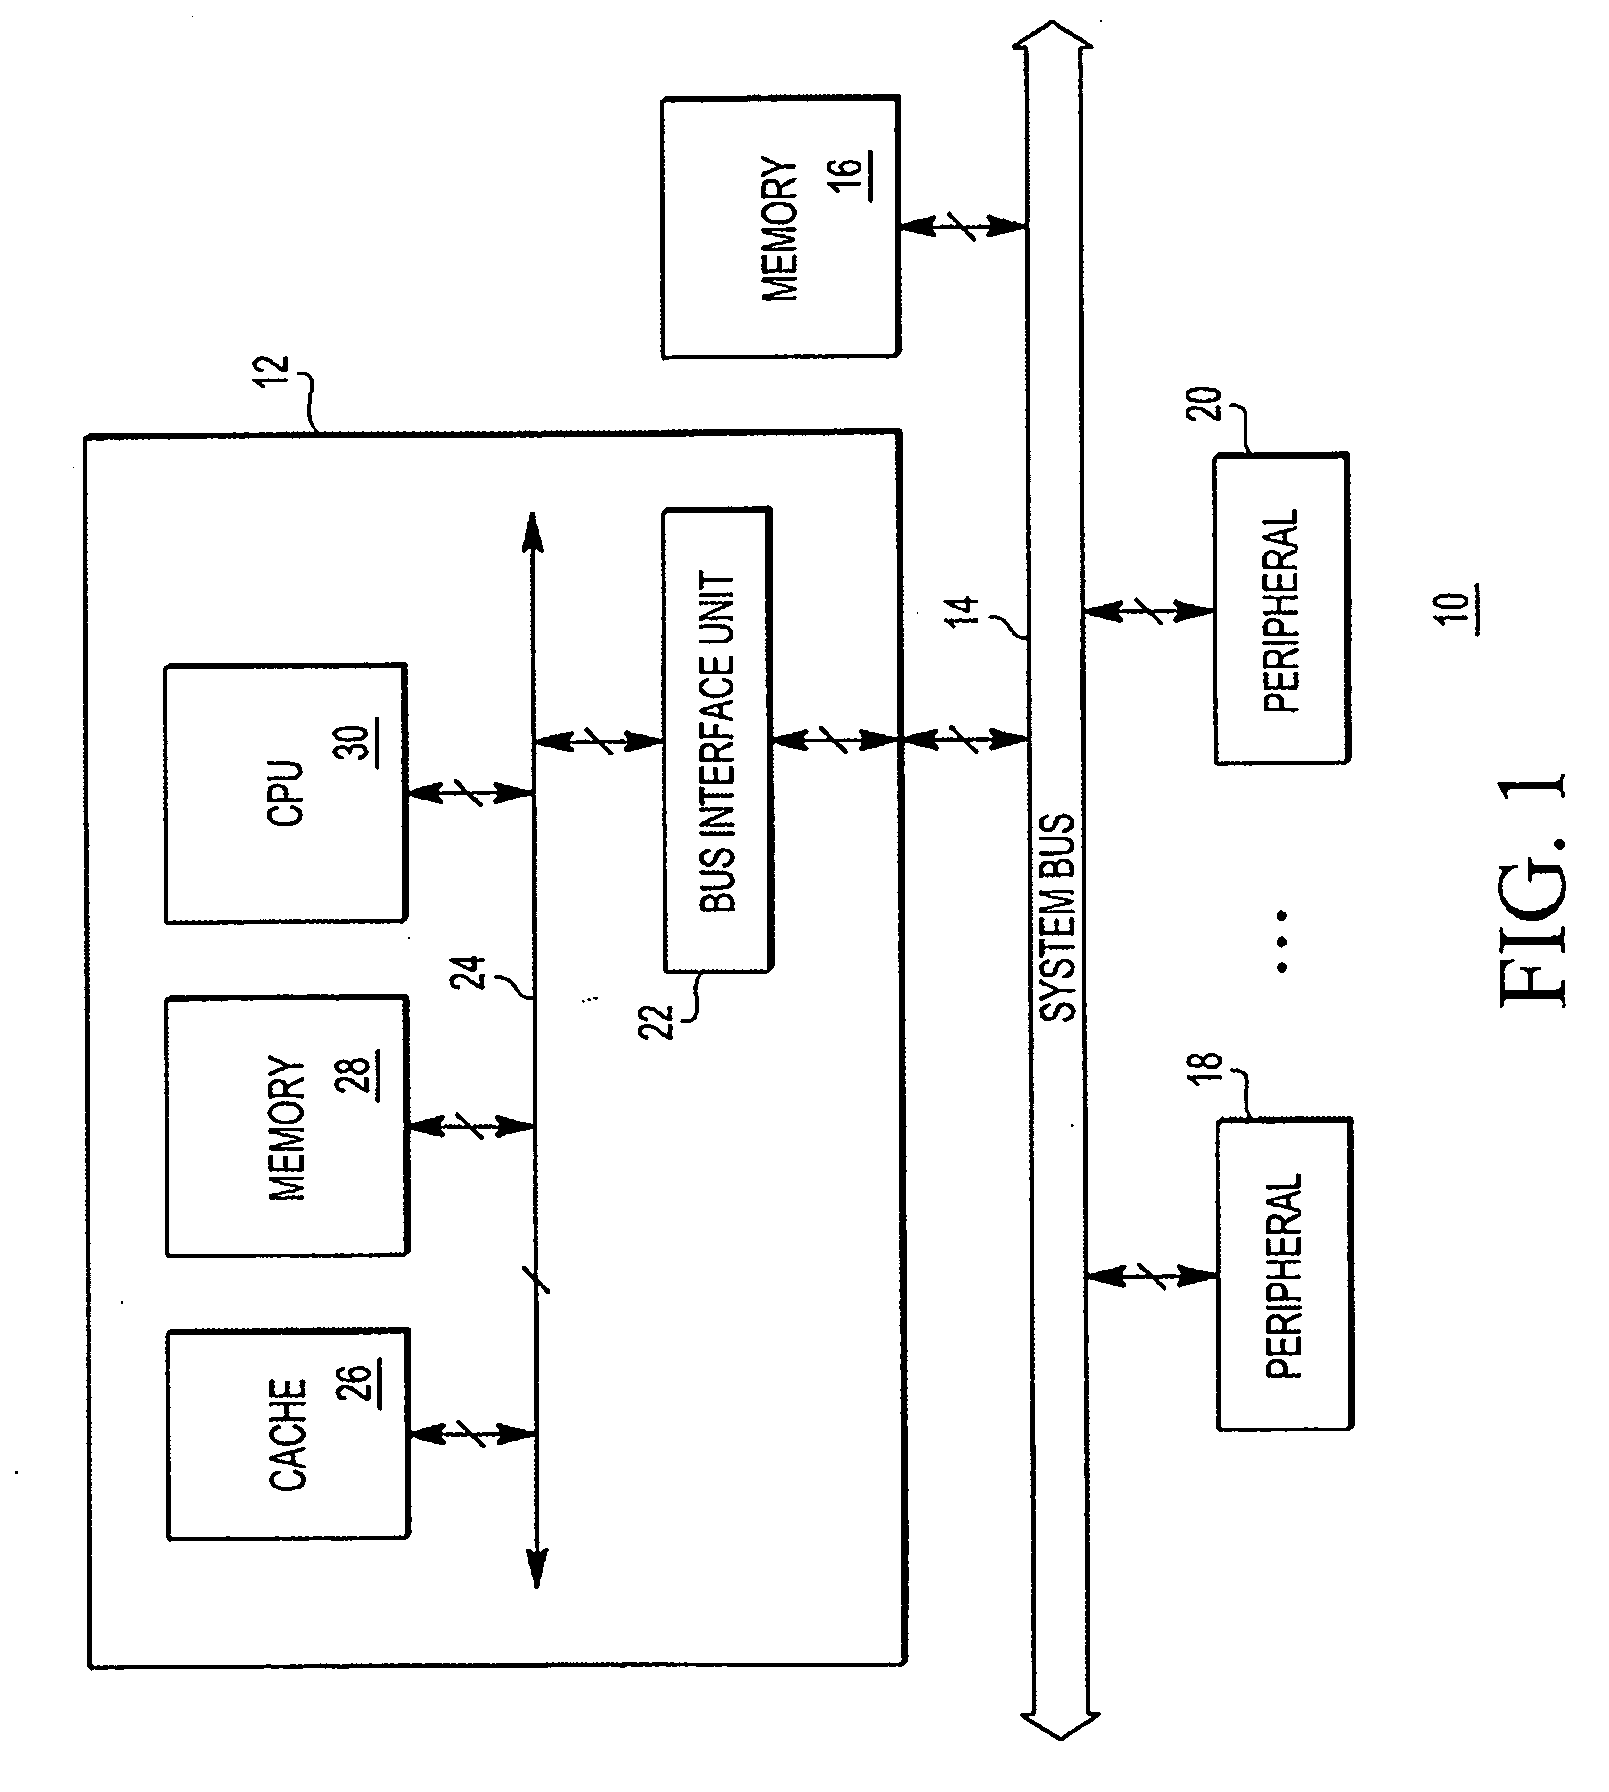 Implementation of multiple error detection schemes for a cache